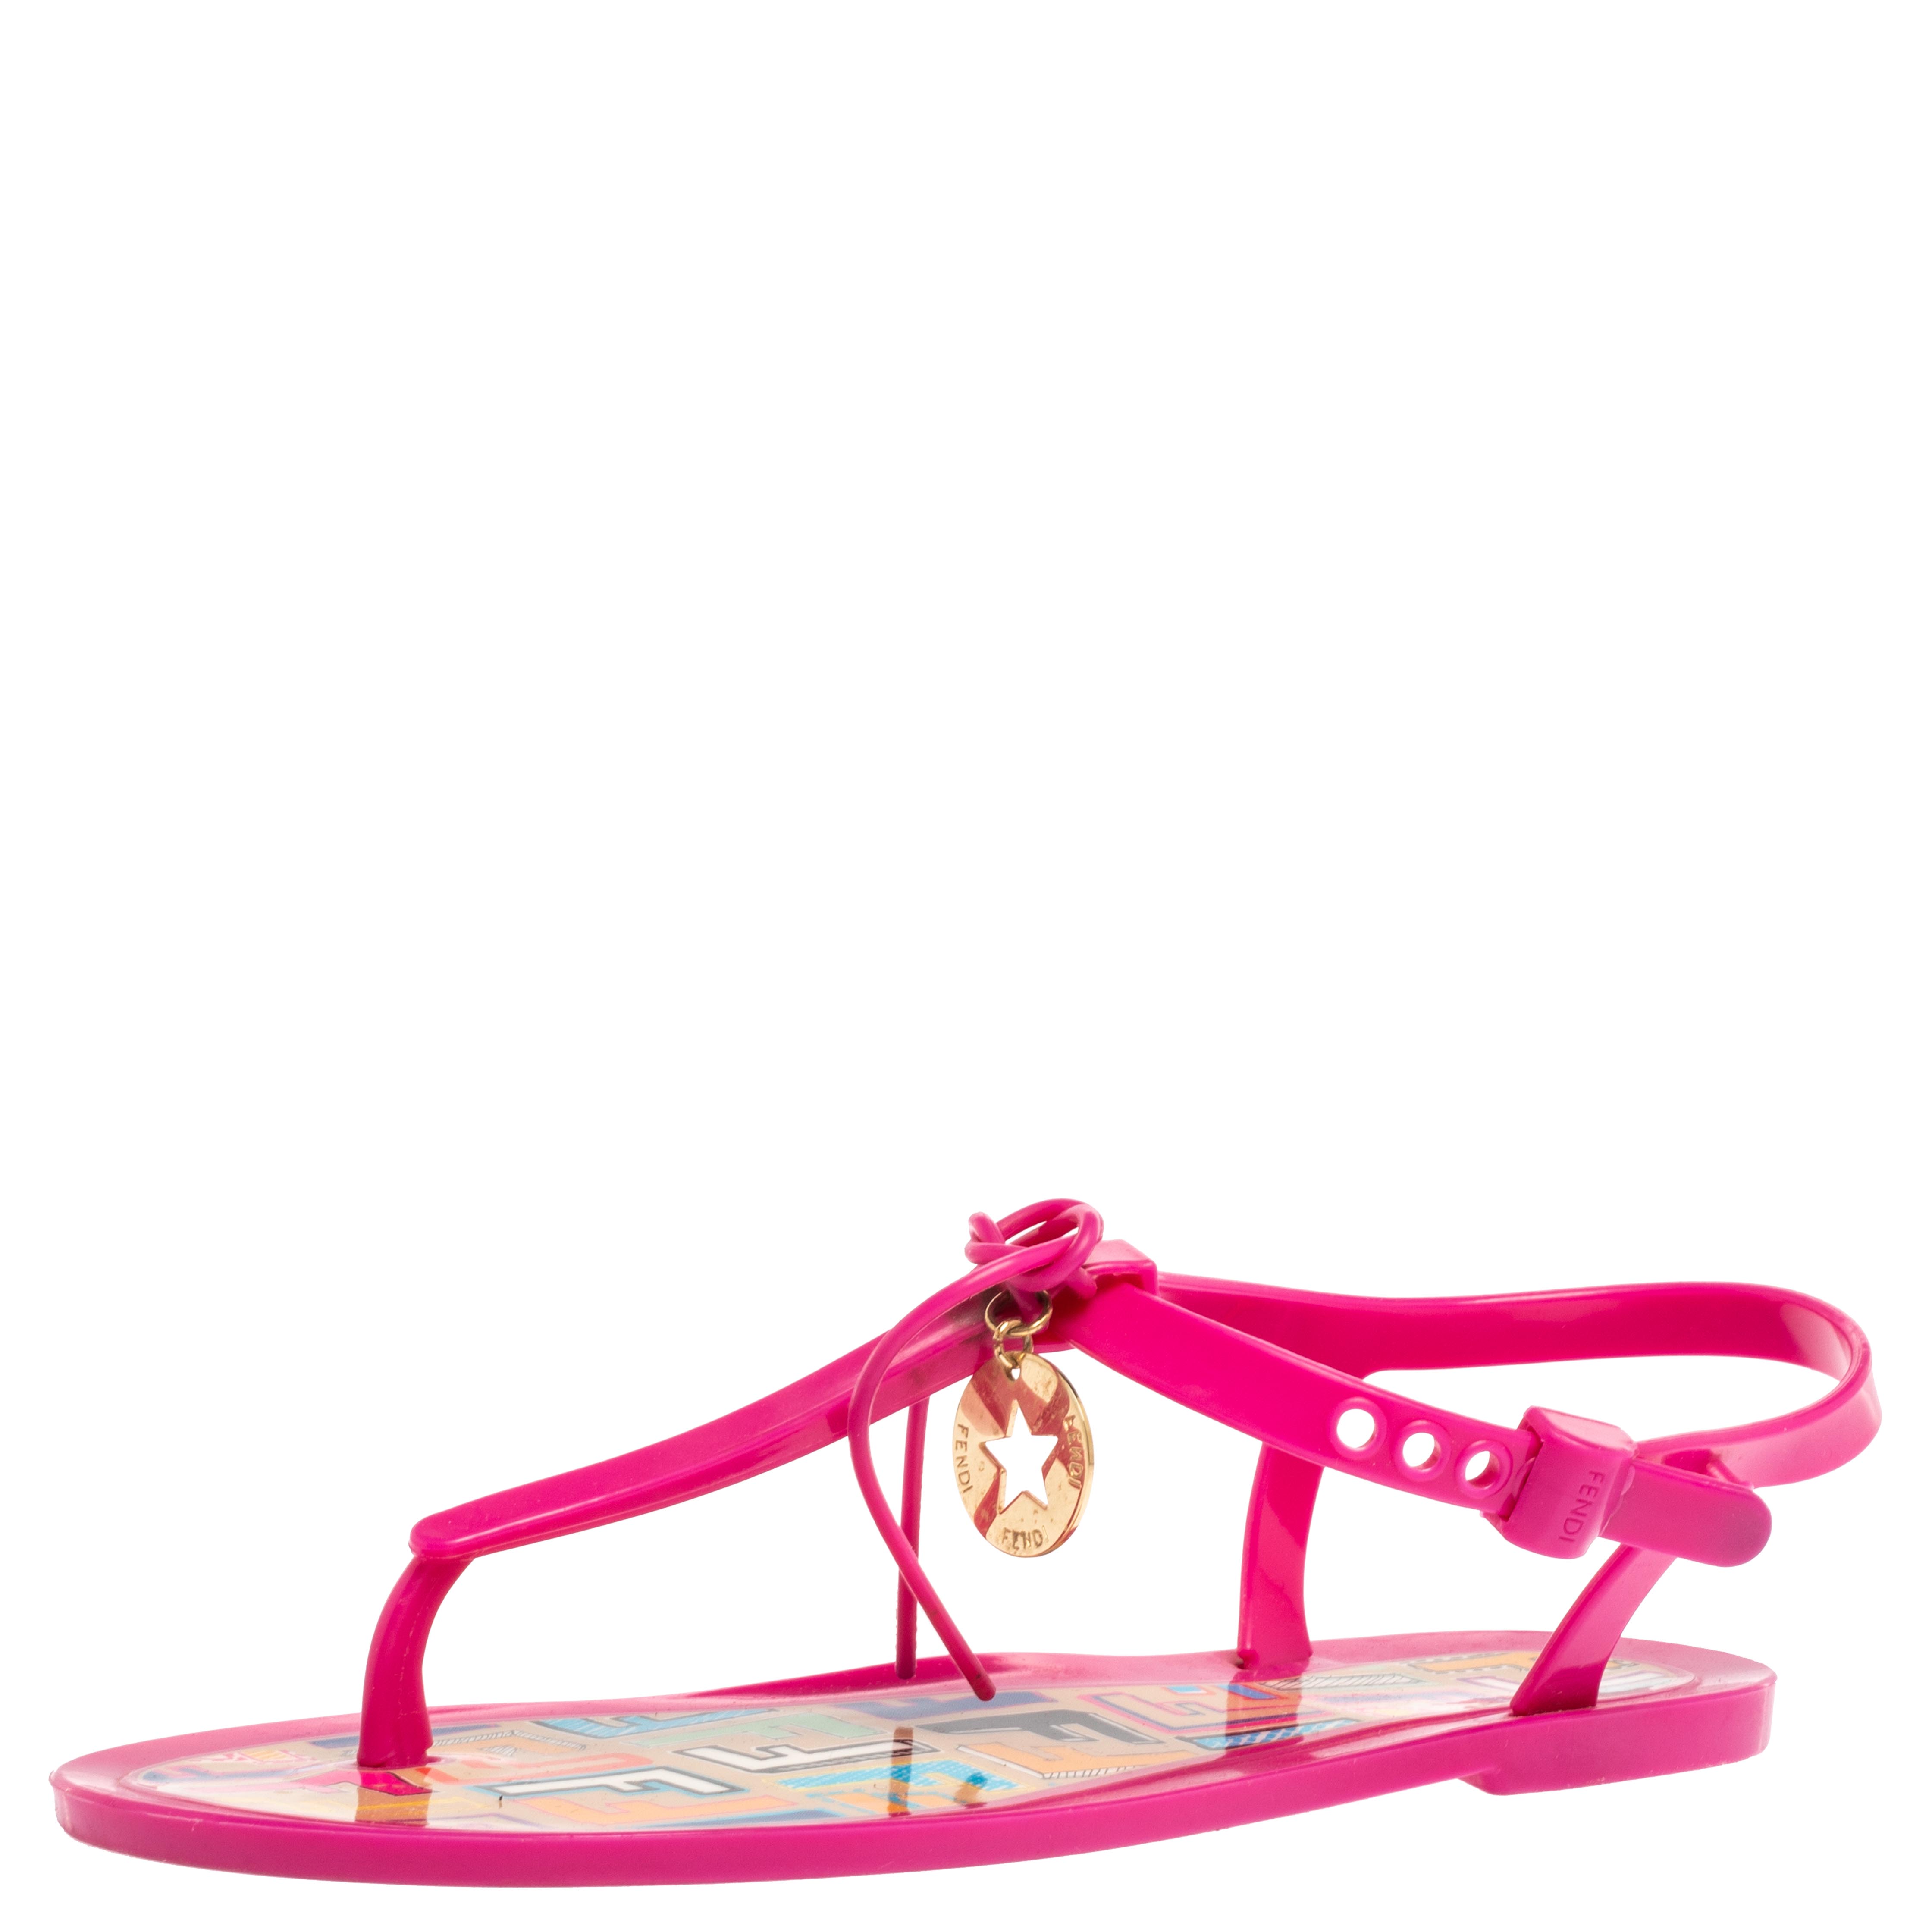 pink jelly flats